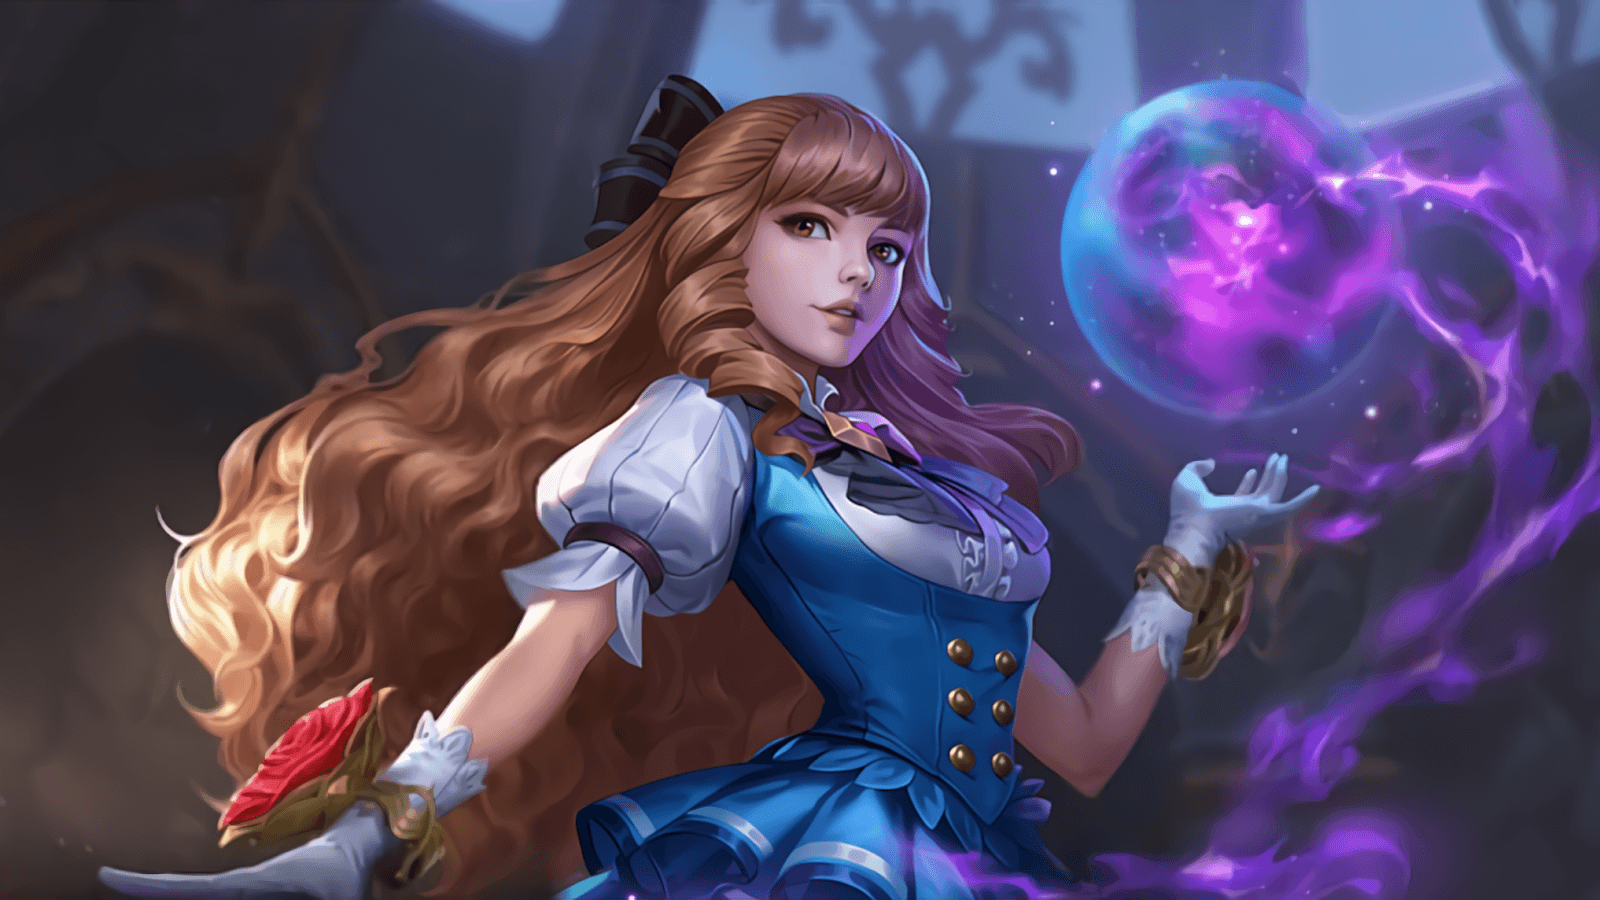  Mobile  Legends  Guinevere  HD Wallpapers  Wallpaper  Cave